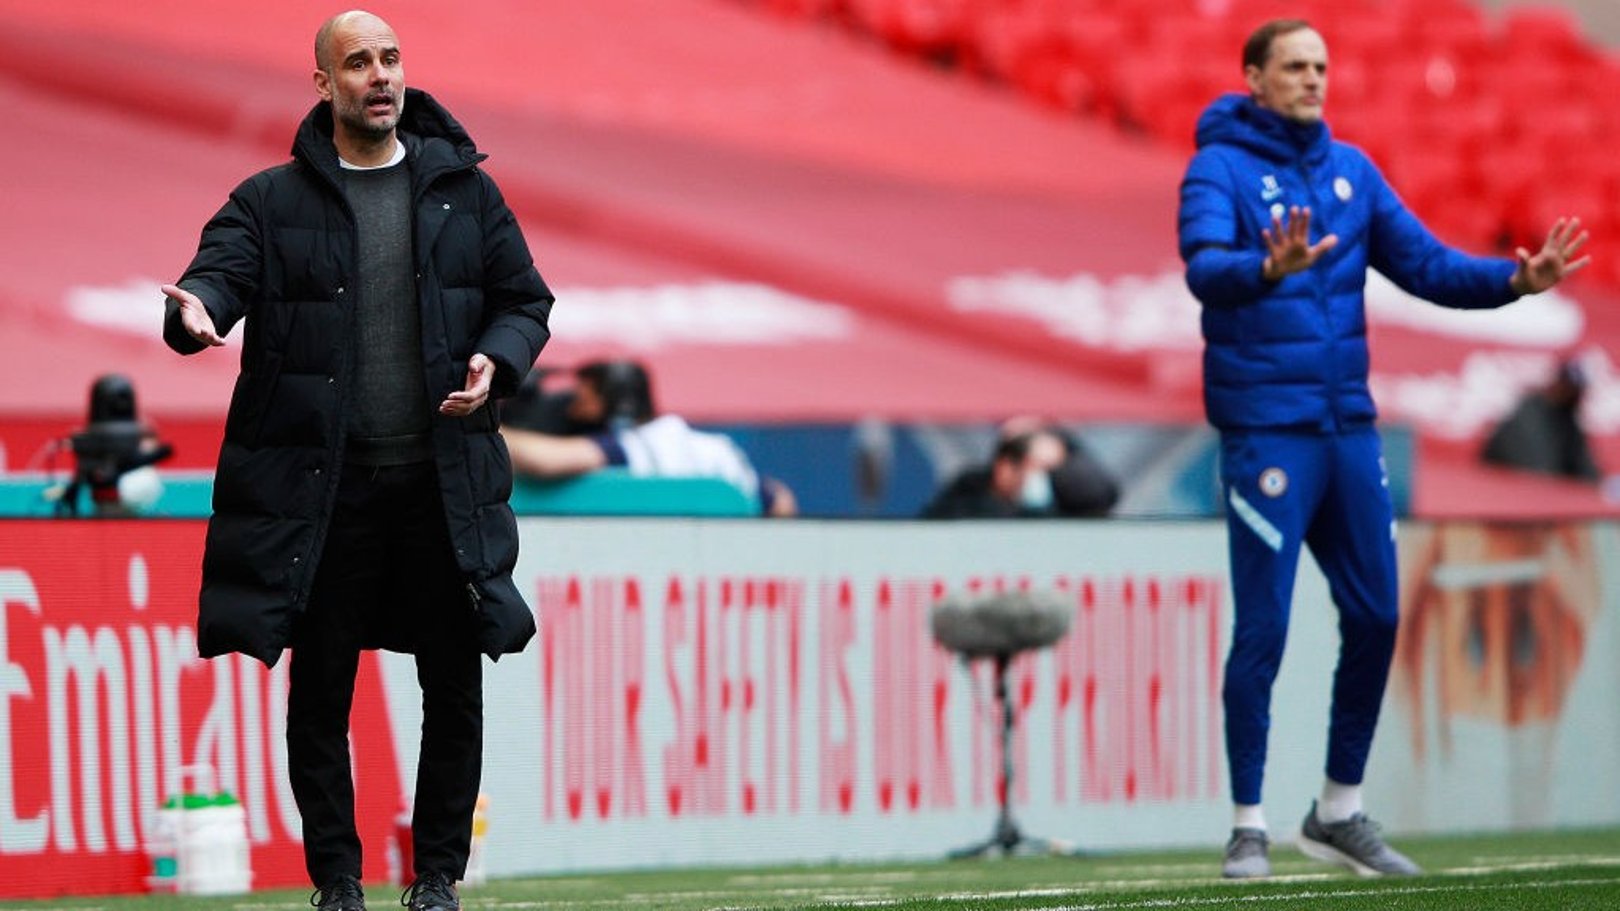 THE BOSS: Guardiola looks to get his message across 